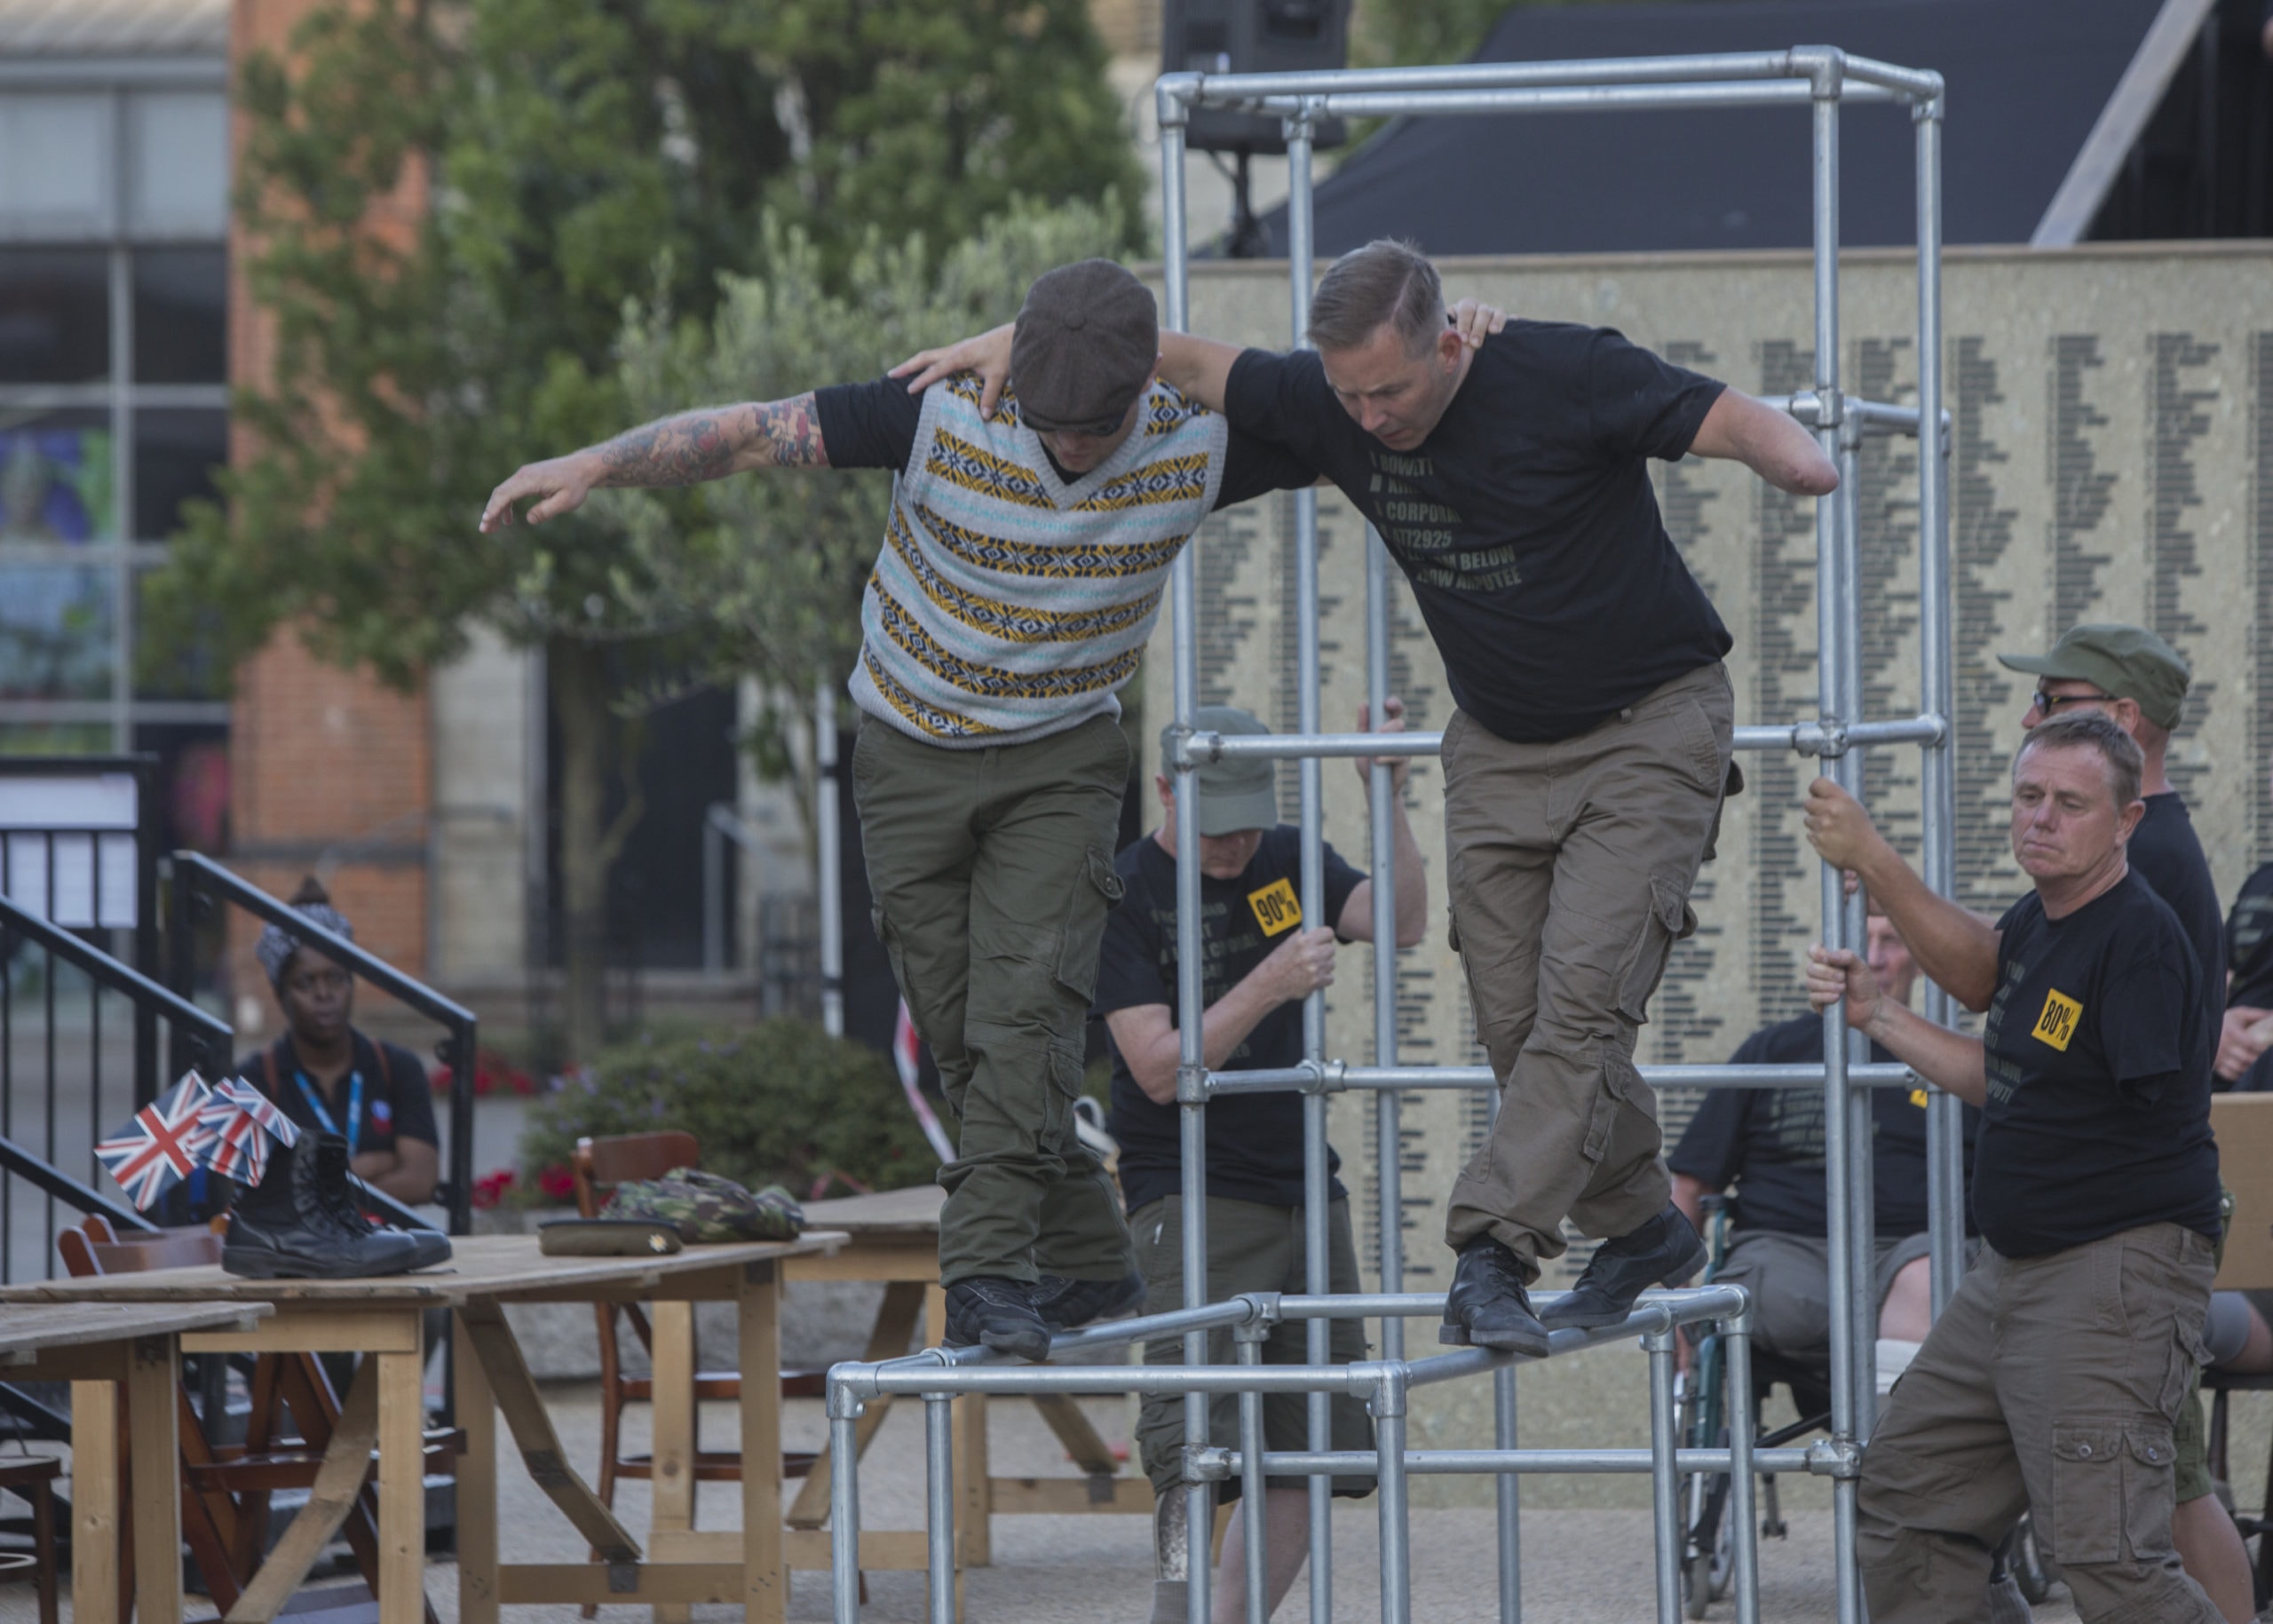 Two performers help each other balanc along a metal scaffolding, with their arms around each others shoulders